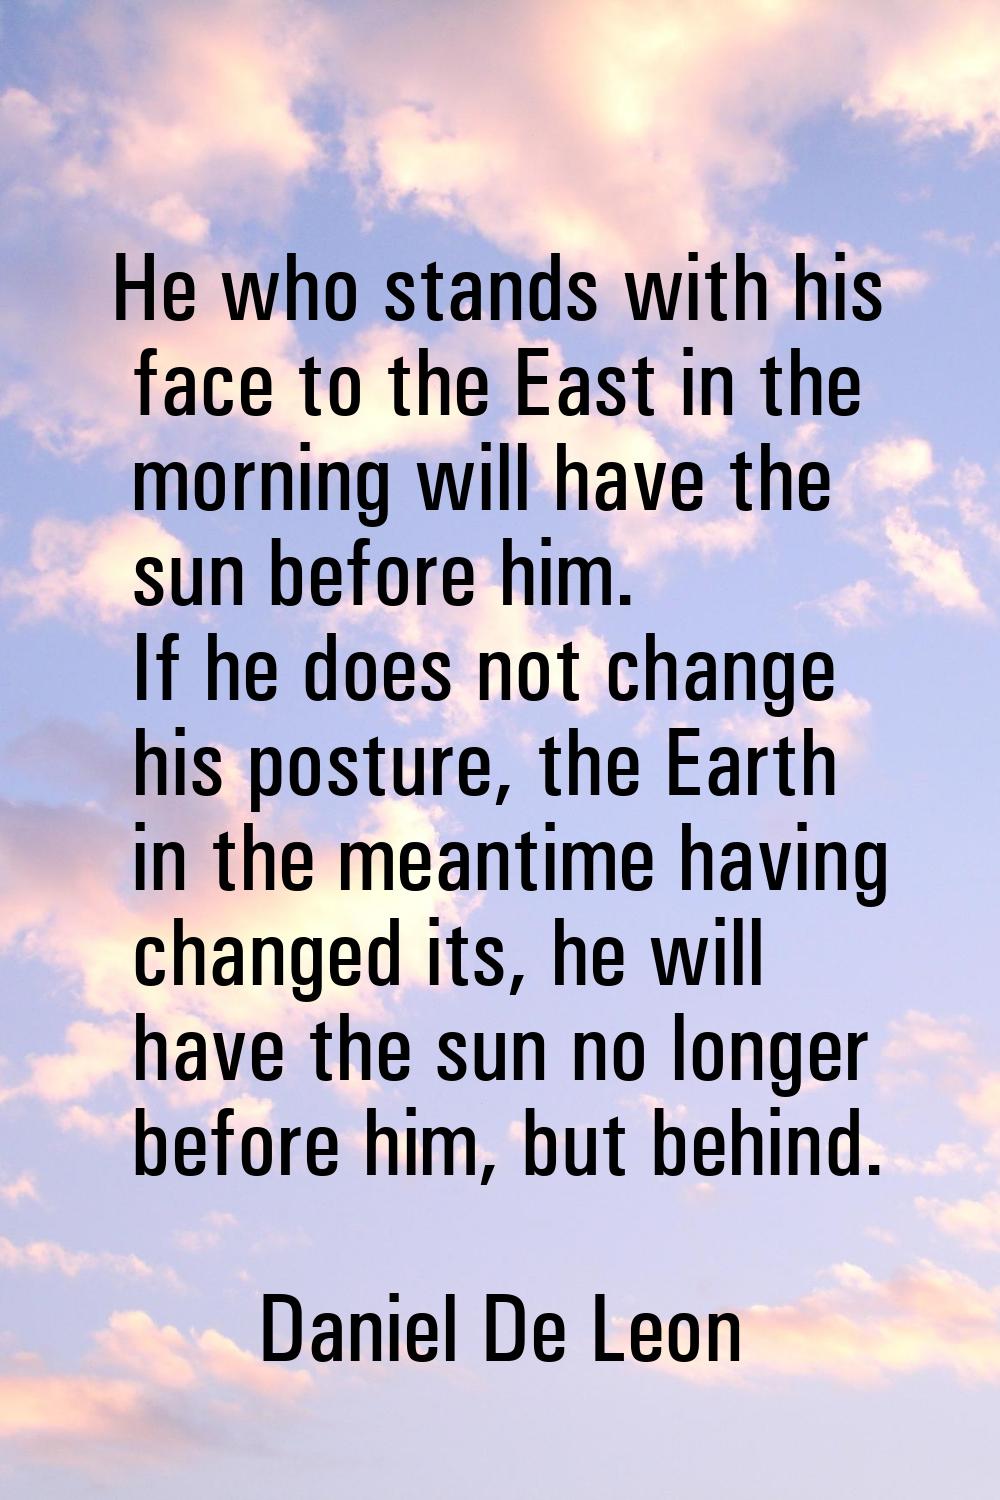 He who stands with his face to the East in the morning will have the sun before him. If he does not